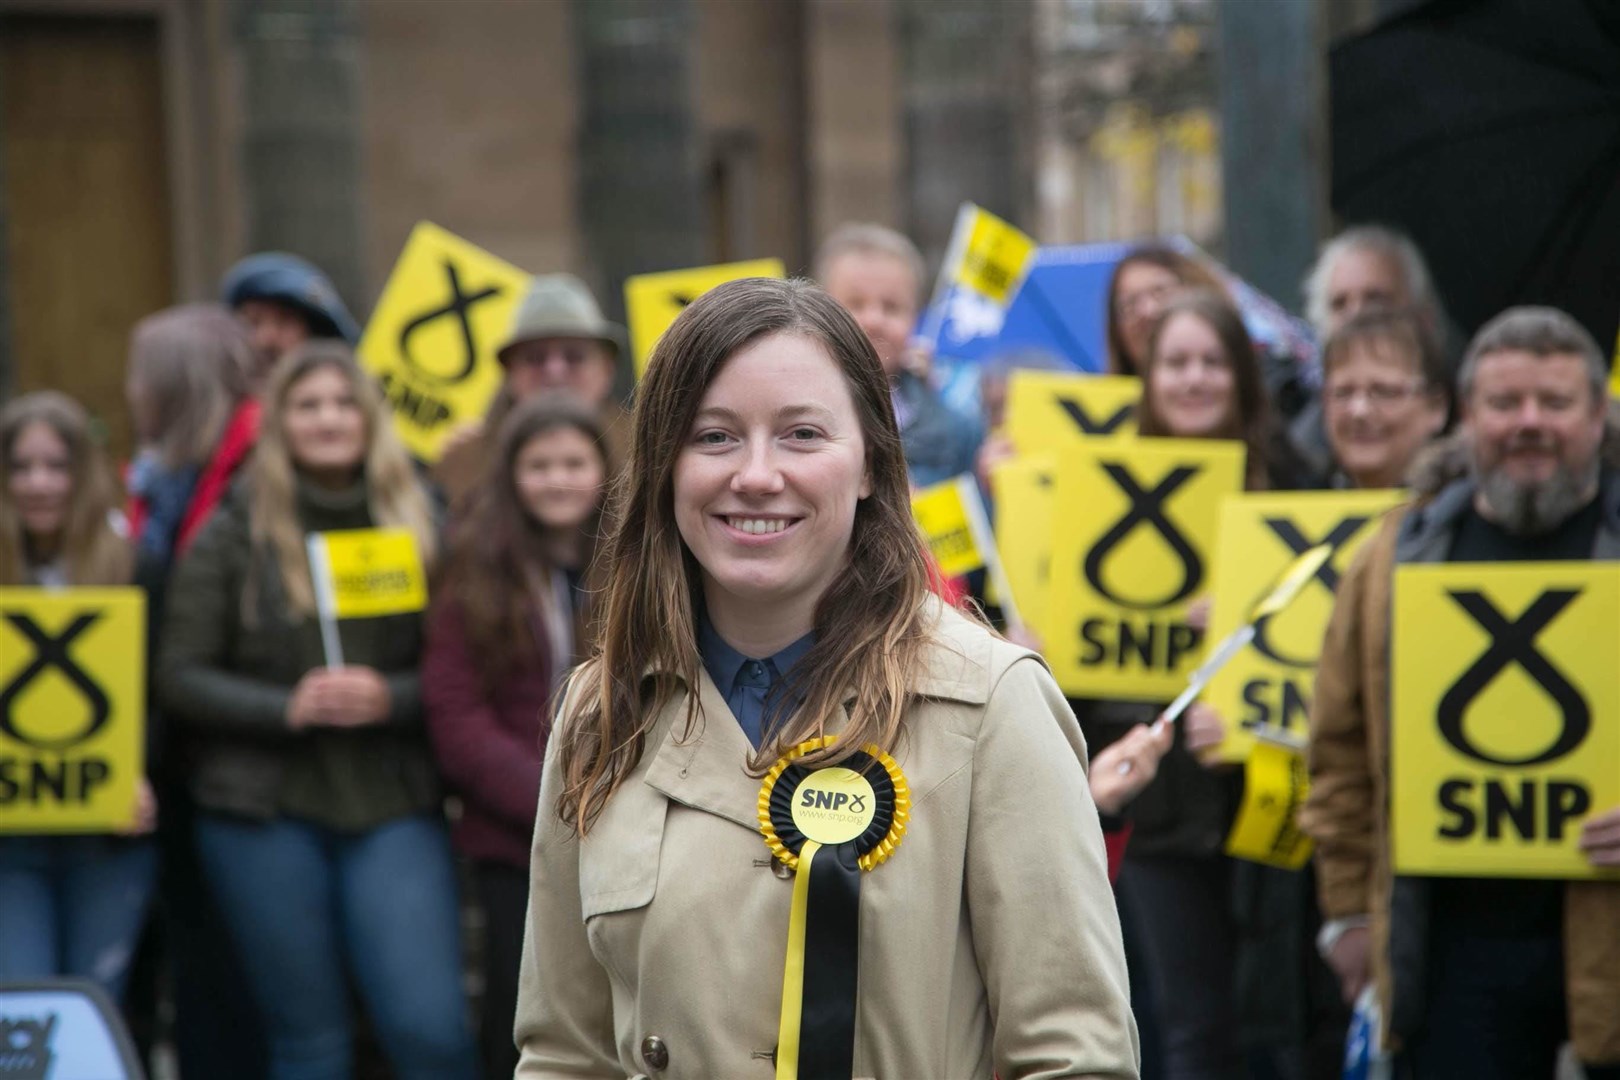 Laura Mitchell welcomed Mr Johnson's visit as good news for the SNP.